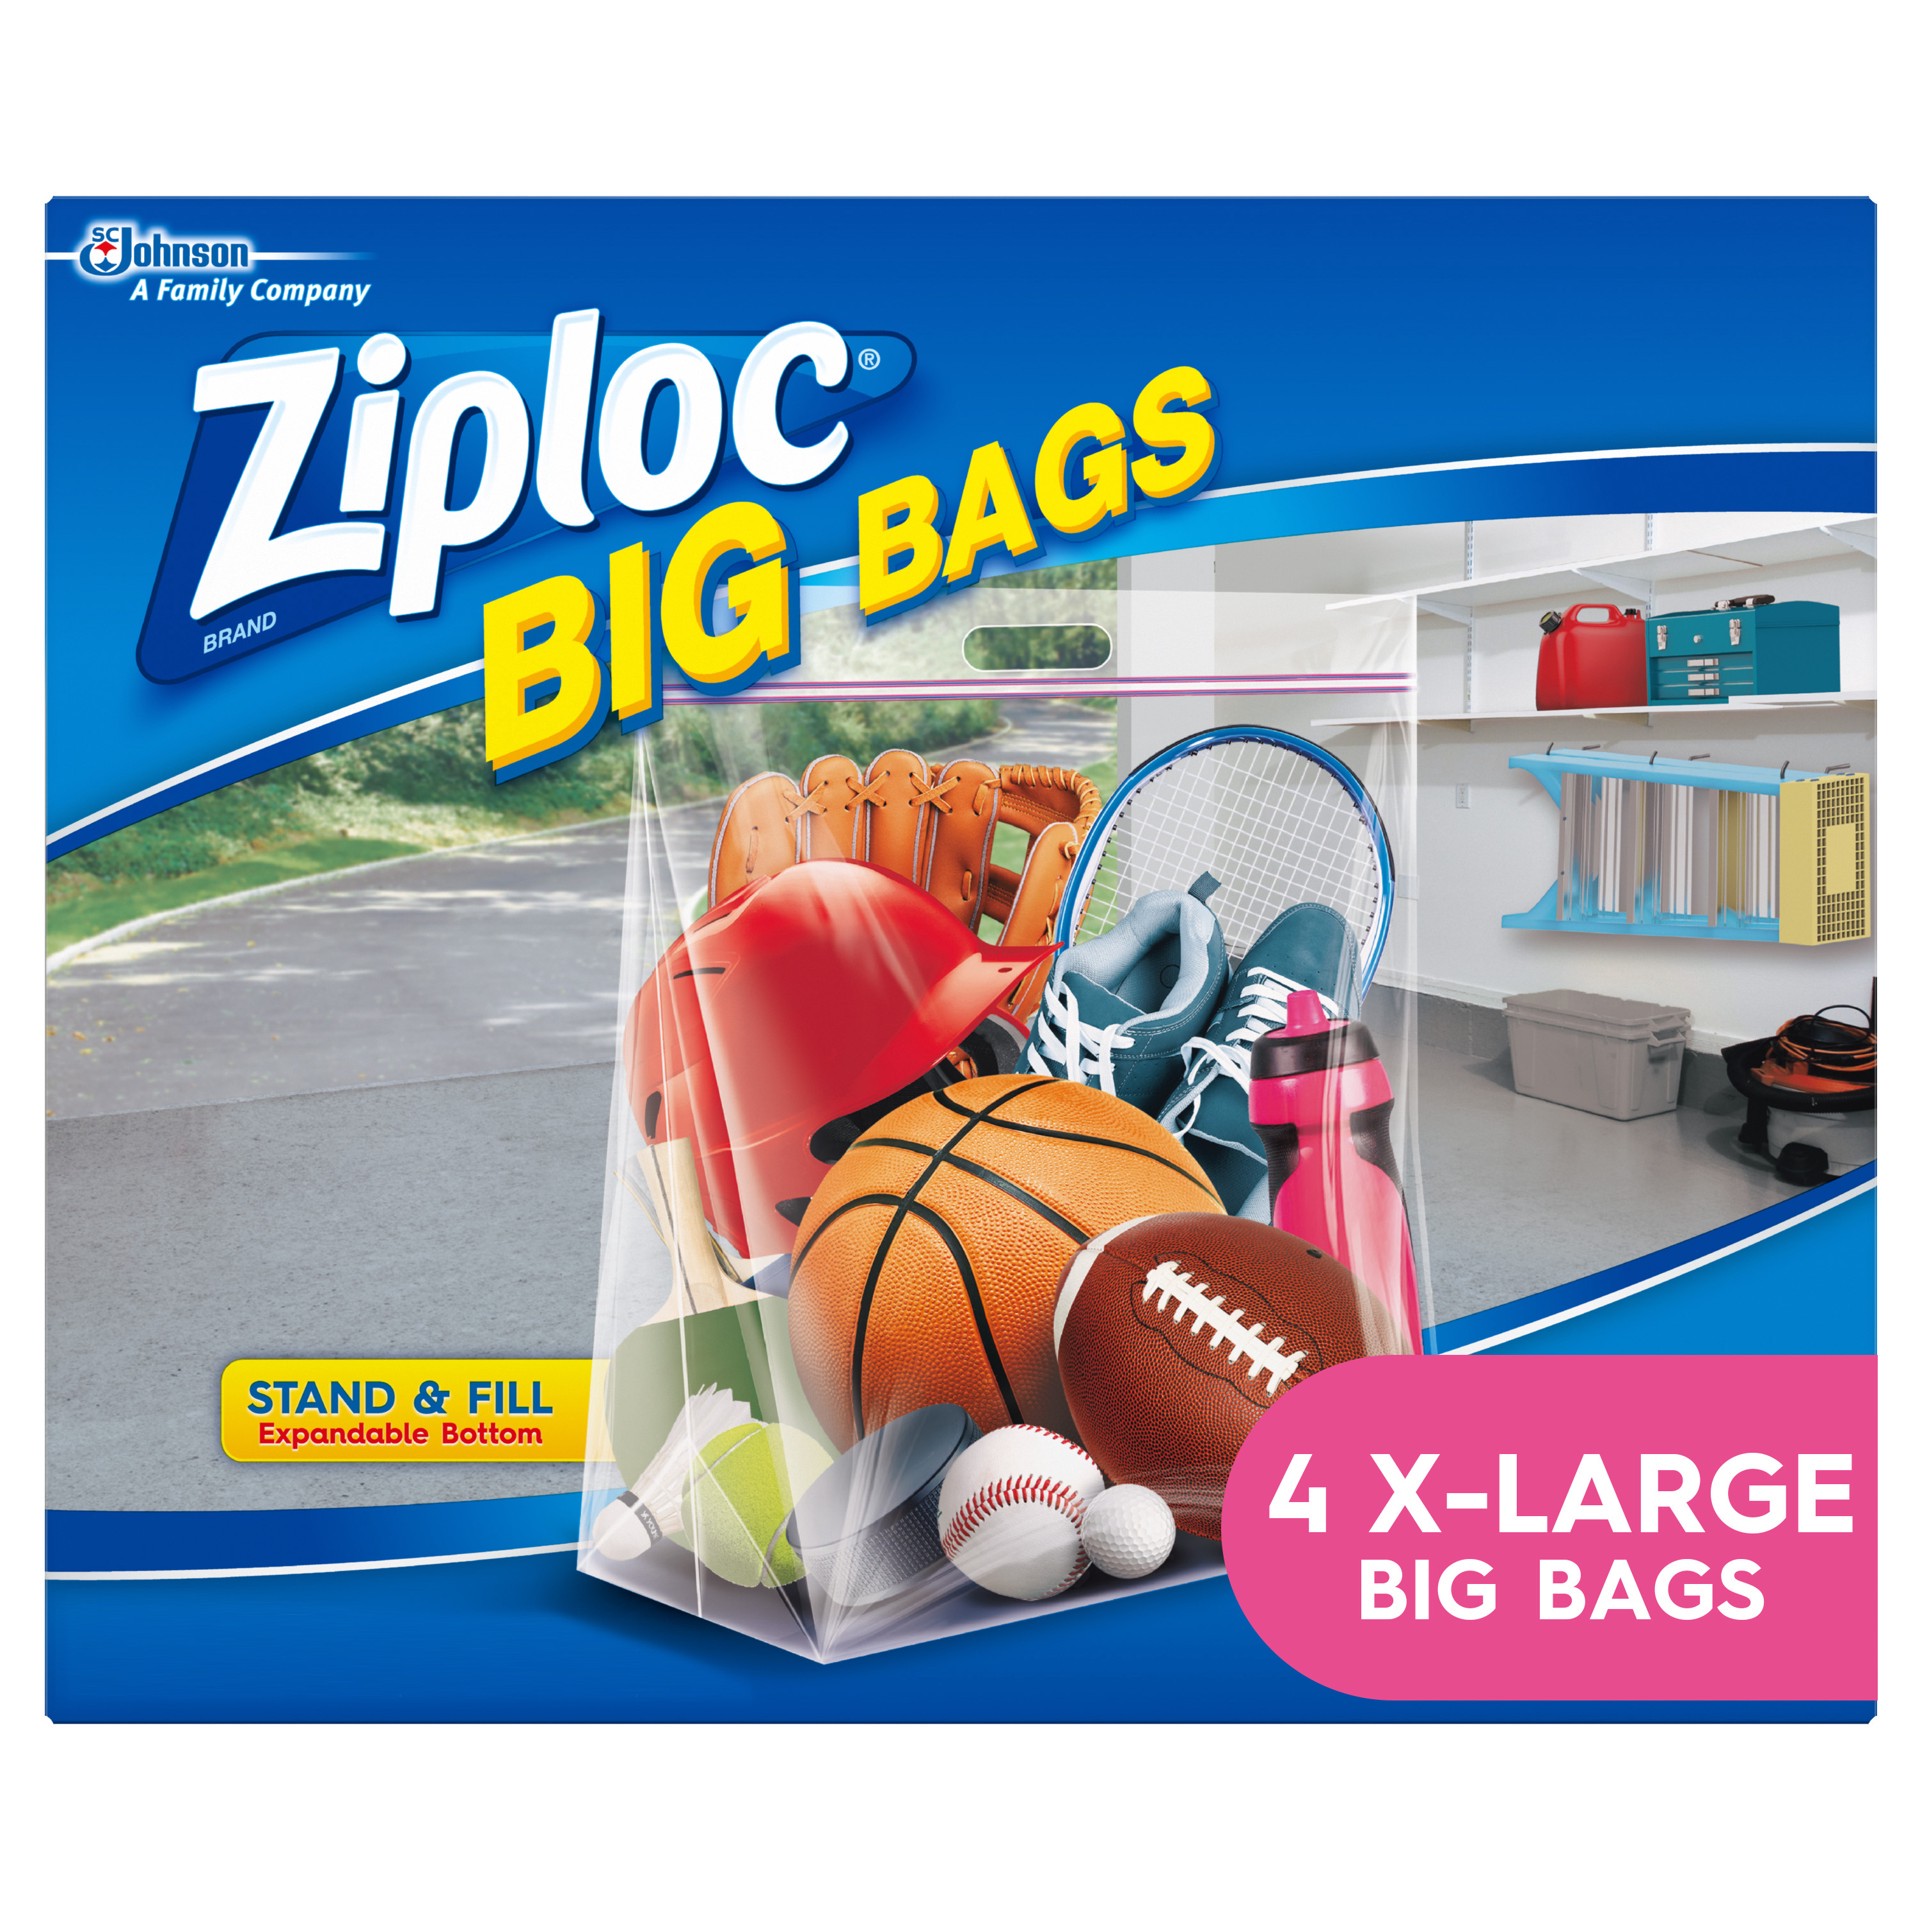 slide 2 of 5, Ziploc Big Bags, X-Large, Secure Double Zipper, 4 CT, Expandable Bottom, Heavy-Duty Plastic, Built-In Handles, Flexible Shape to Fit Where Storage Boxes Can't, 4 ct